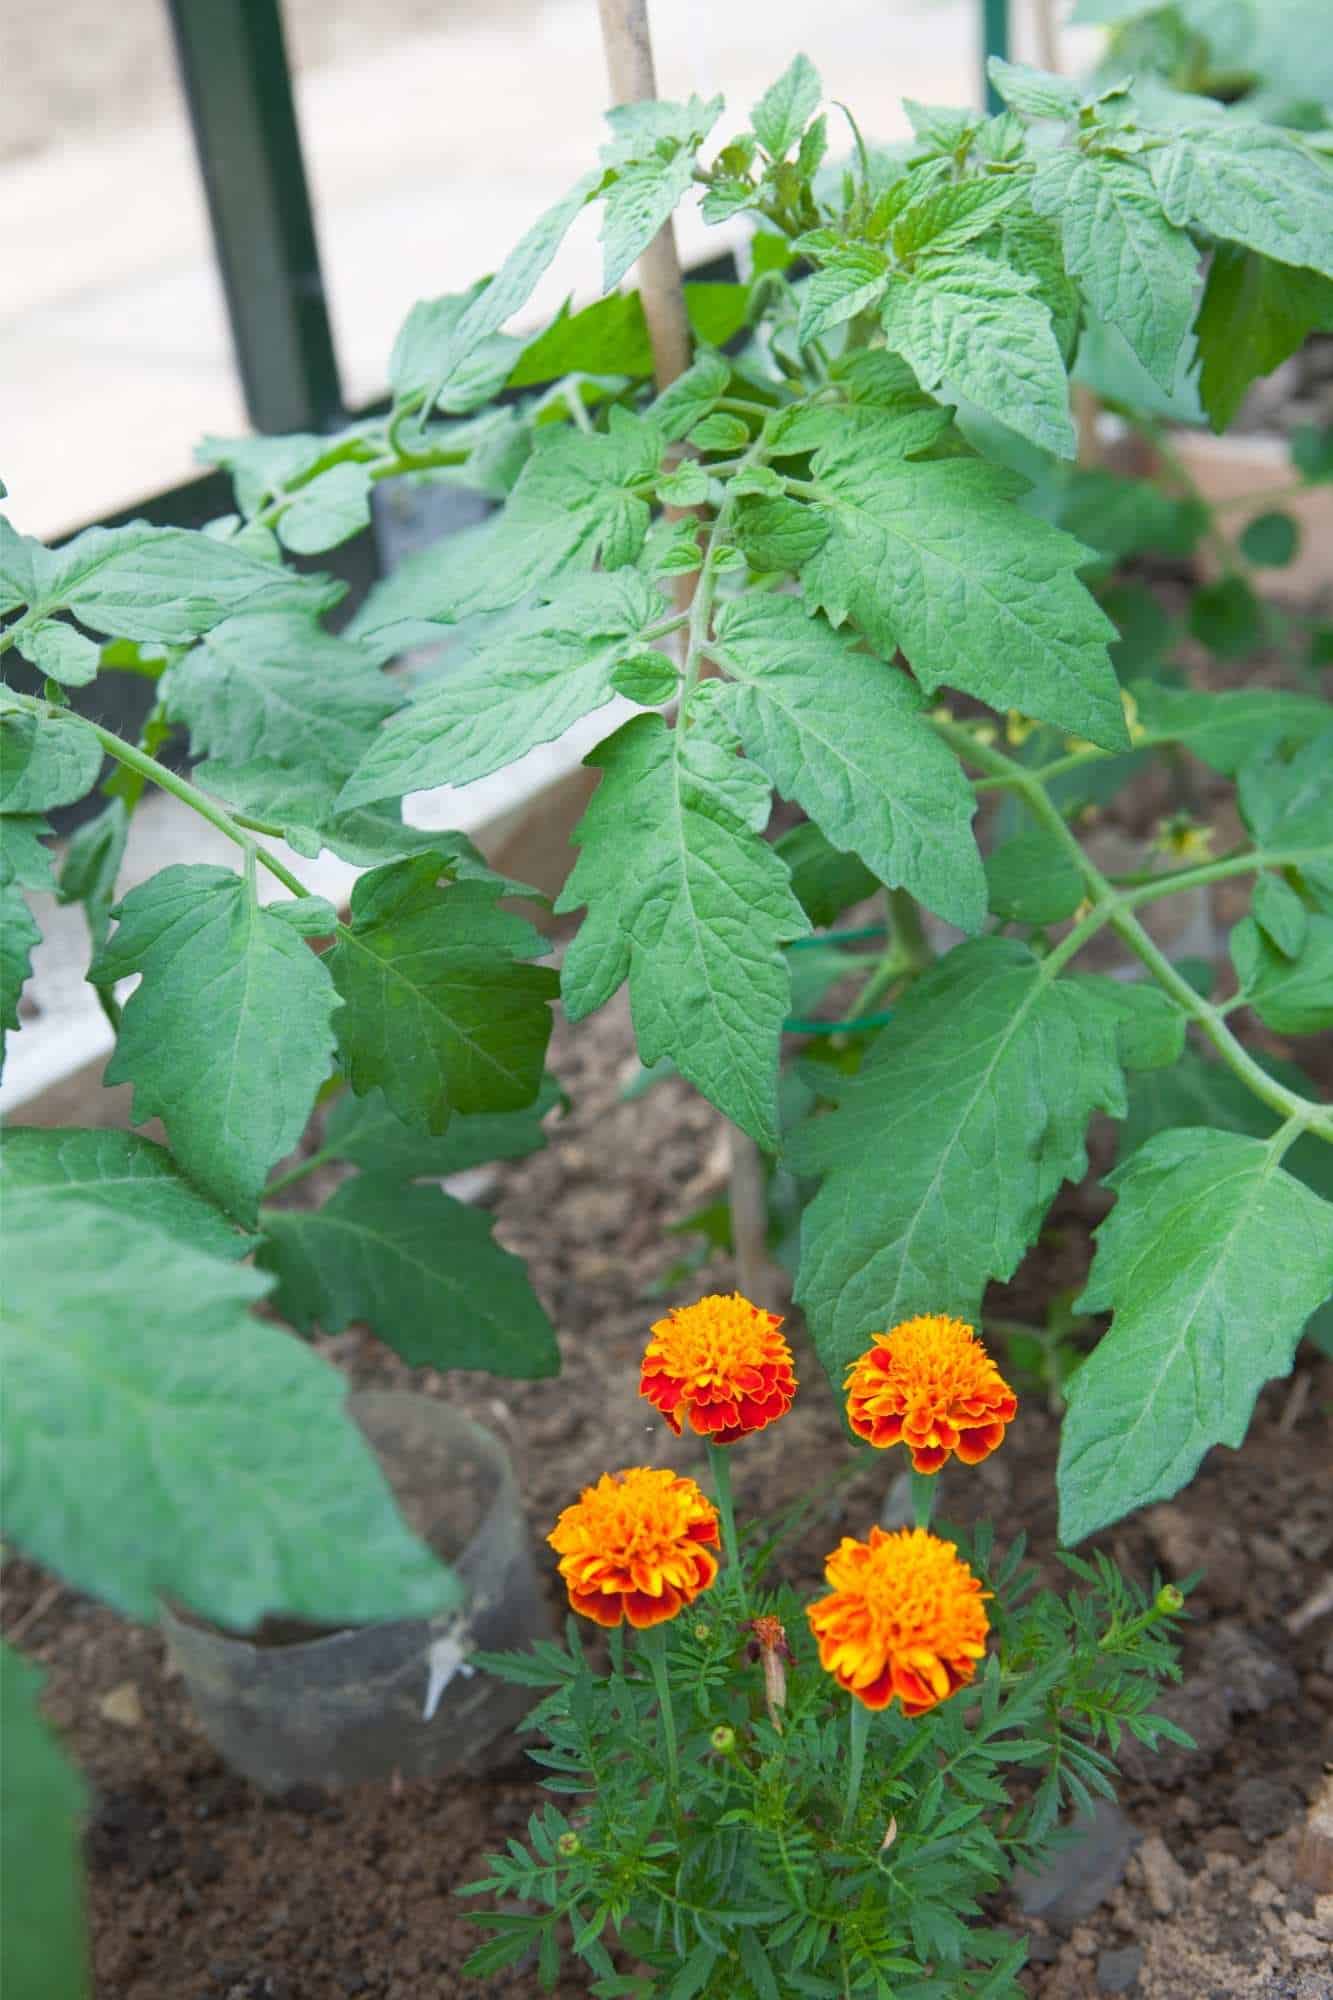 Marigolds with tomatoes as companion plants to deter insects.